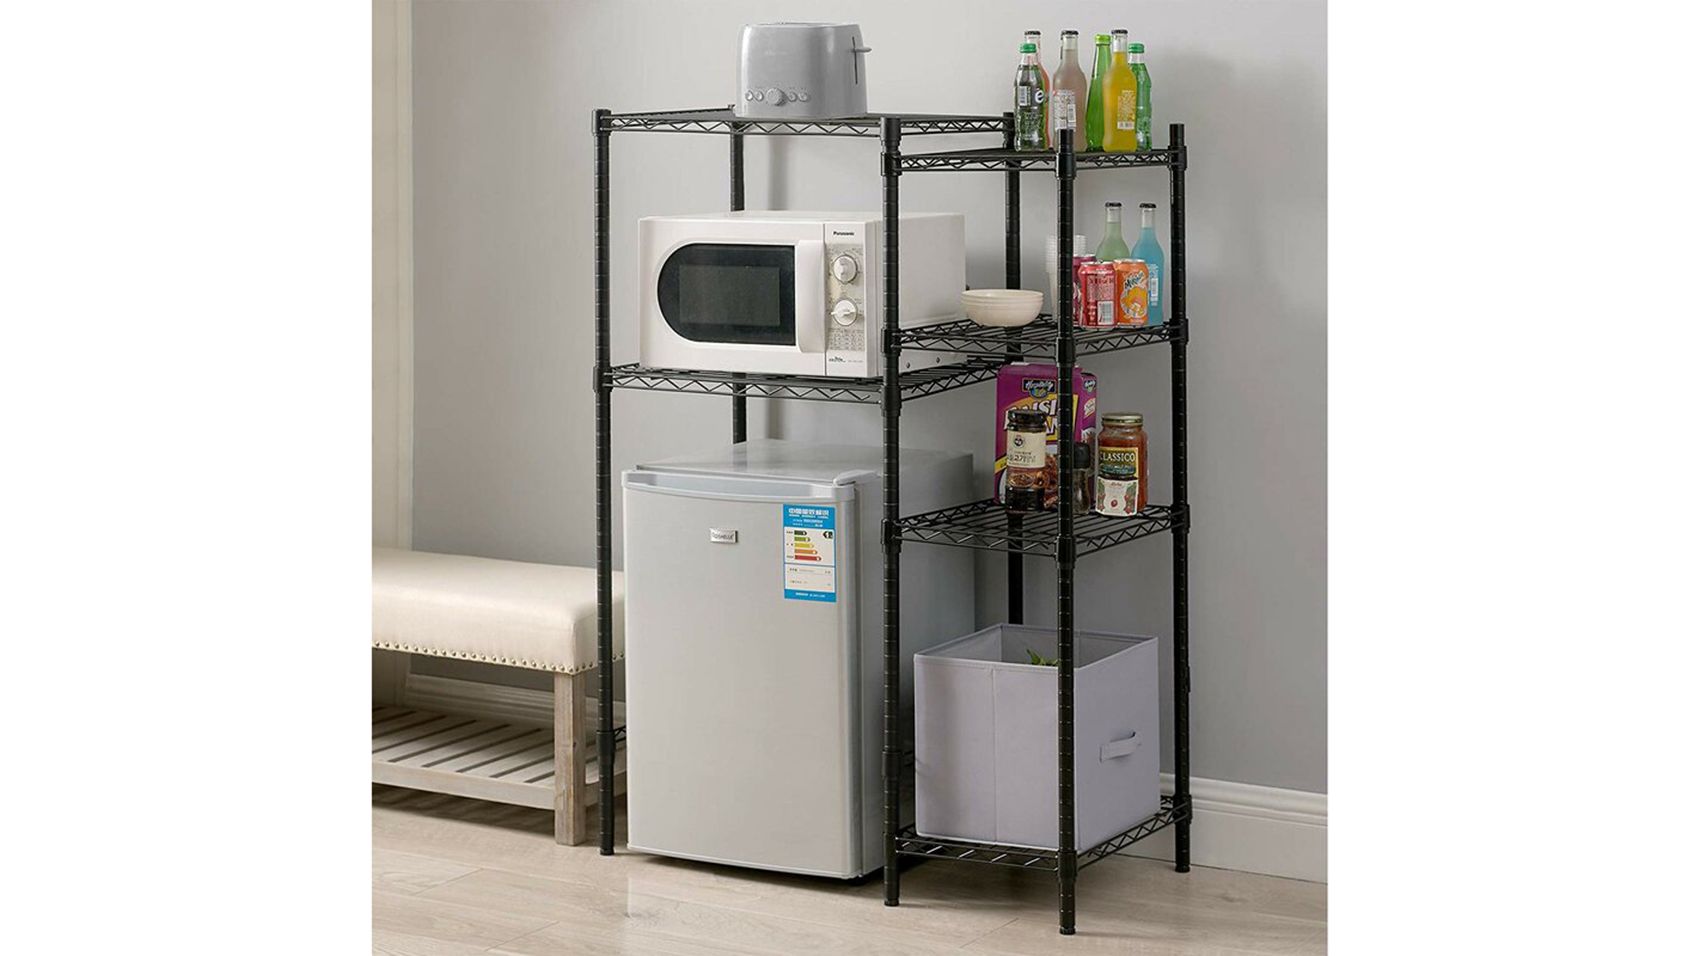 Must-have appliances for the college dorm room - Newsday